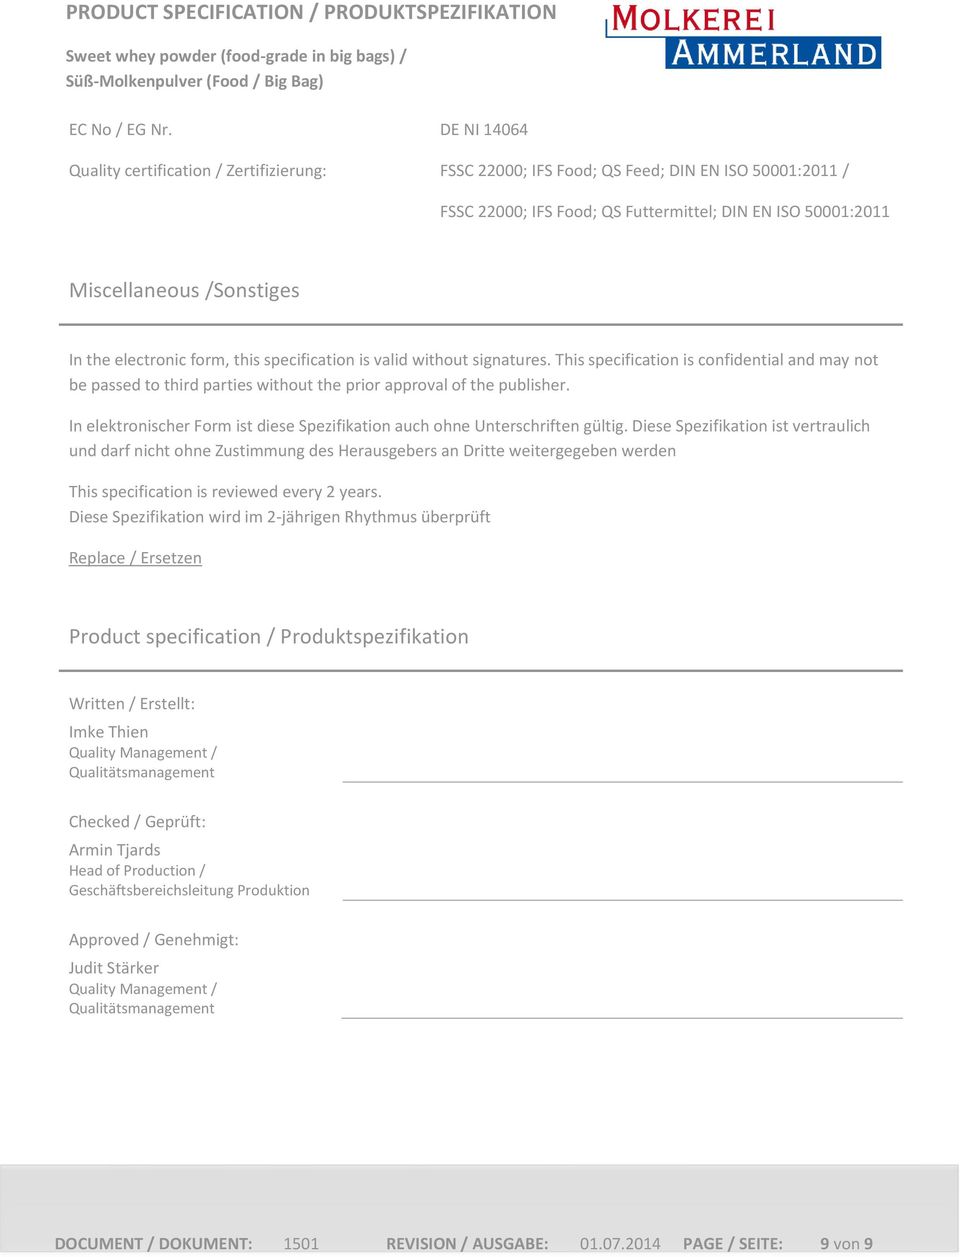 electronic form, this specification is valid without signatures. This specification is confidential and may not be passed to third parties without the prior approval of the publisher.